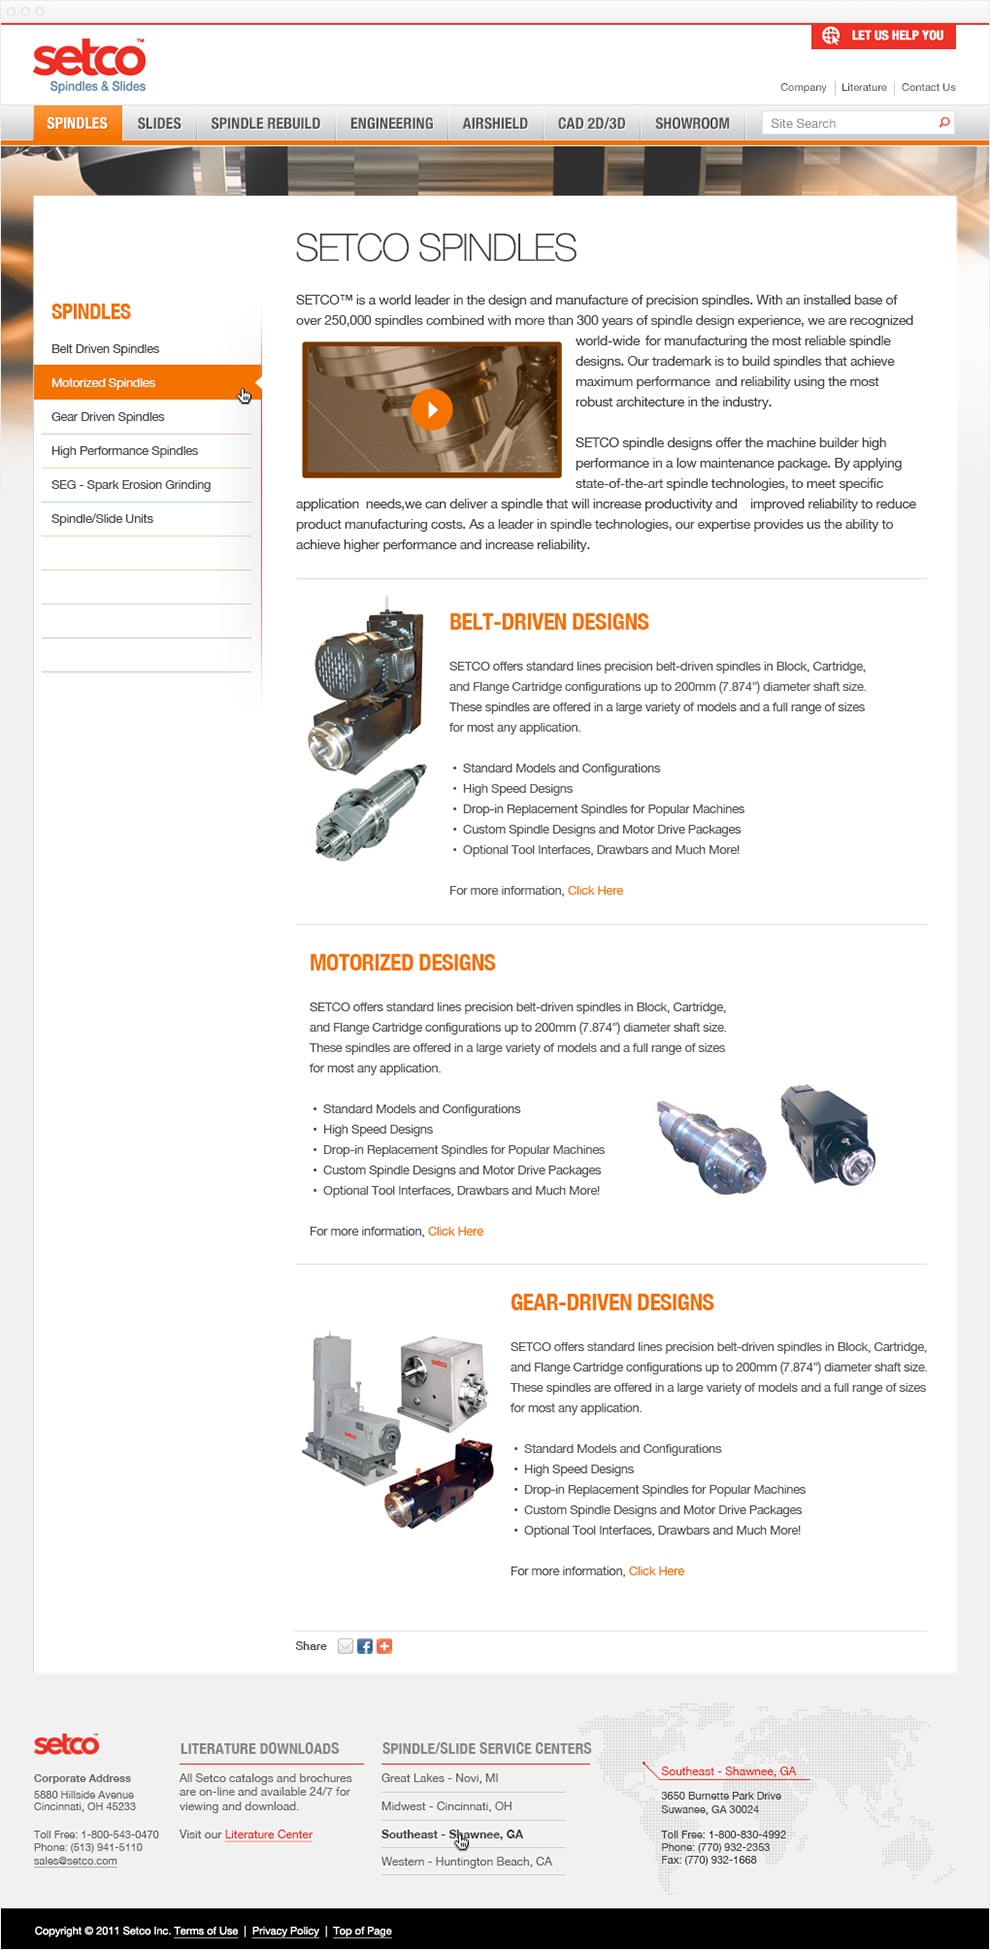 Screen capture of the interior products page.